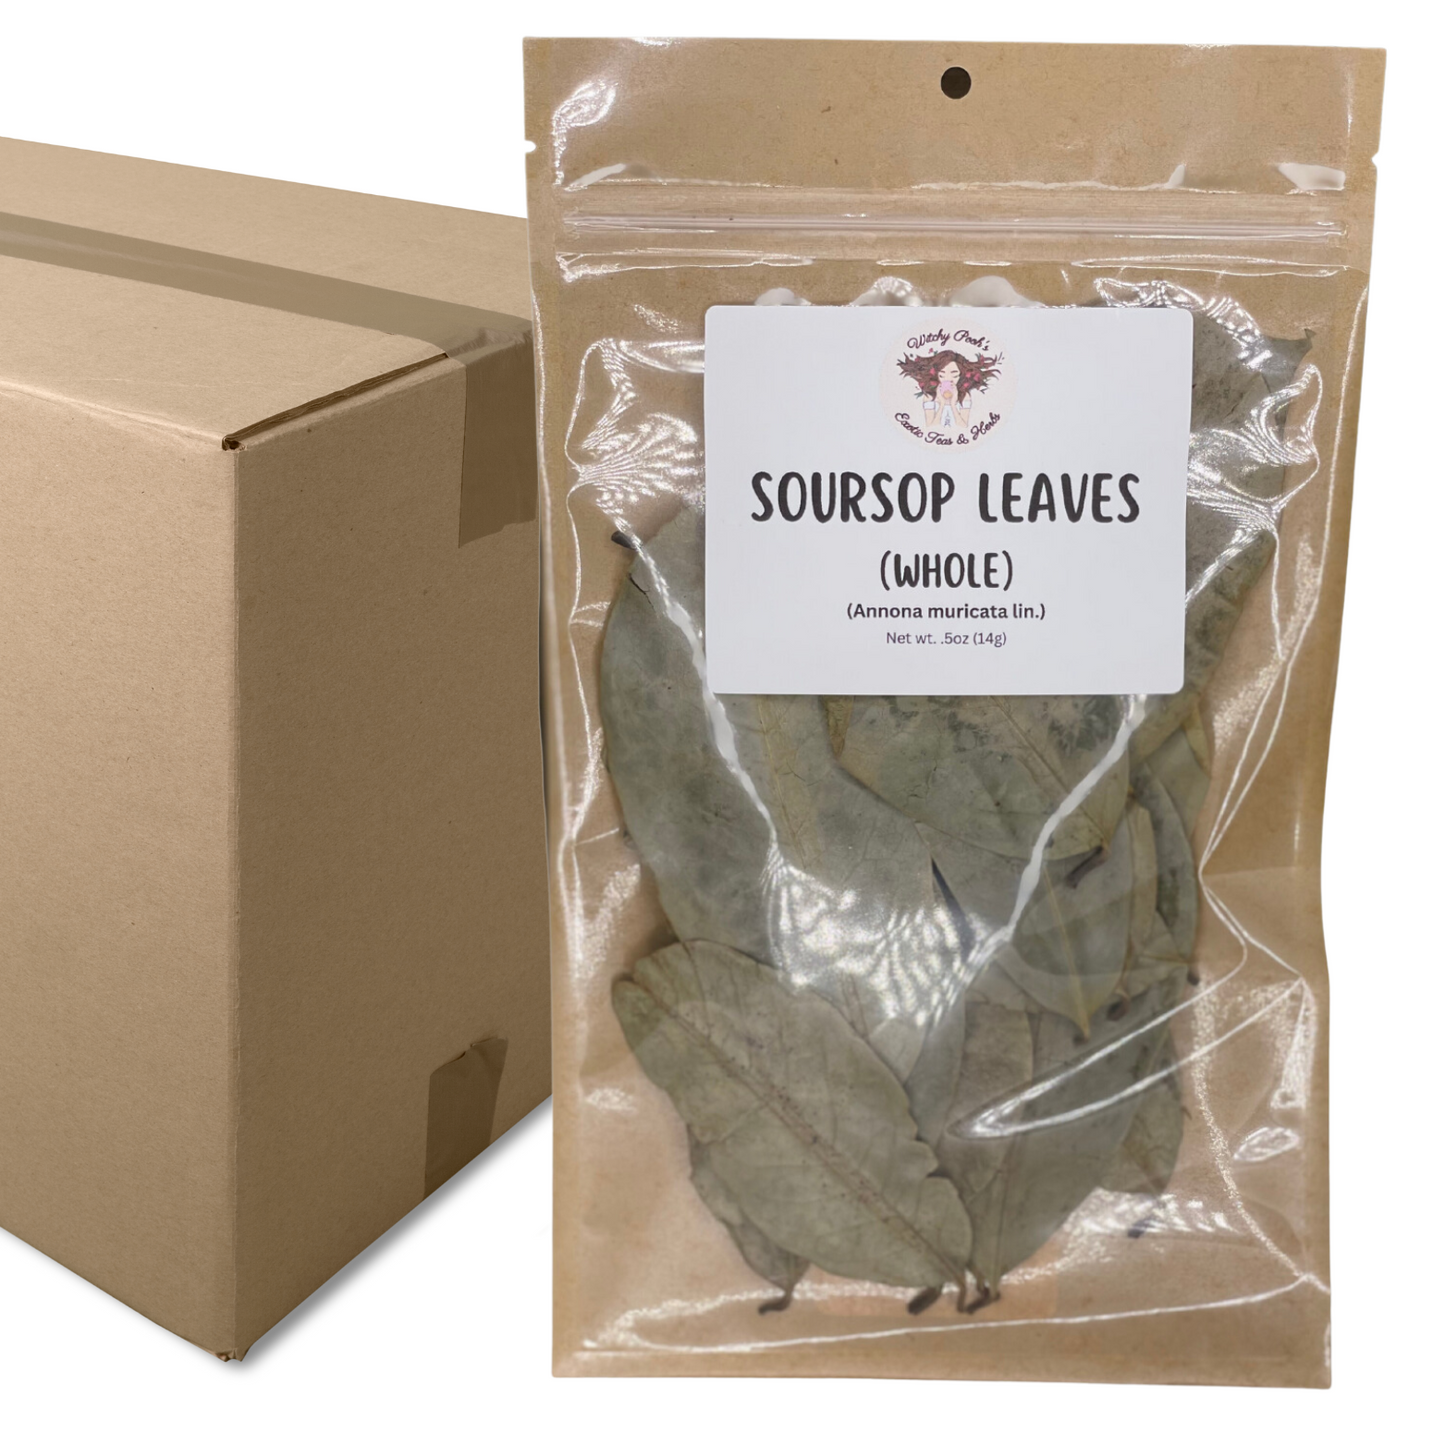 Witchy Pooh's Soursop Whole Tea Leaves for Hoodoo, Rituals, Offerings to Deities